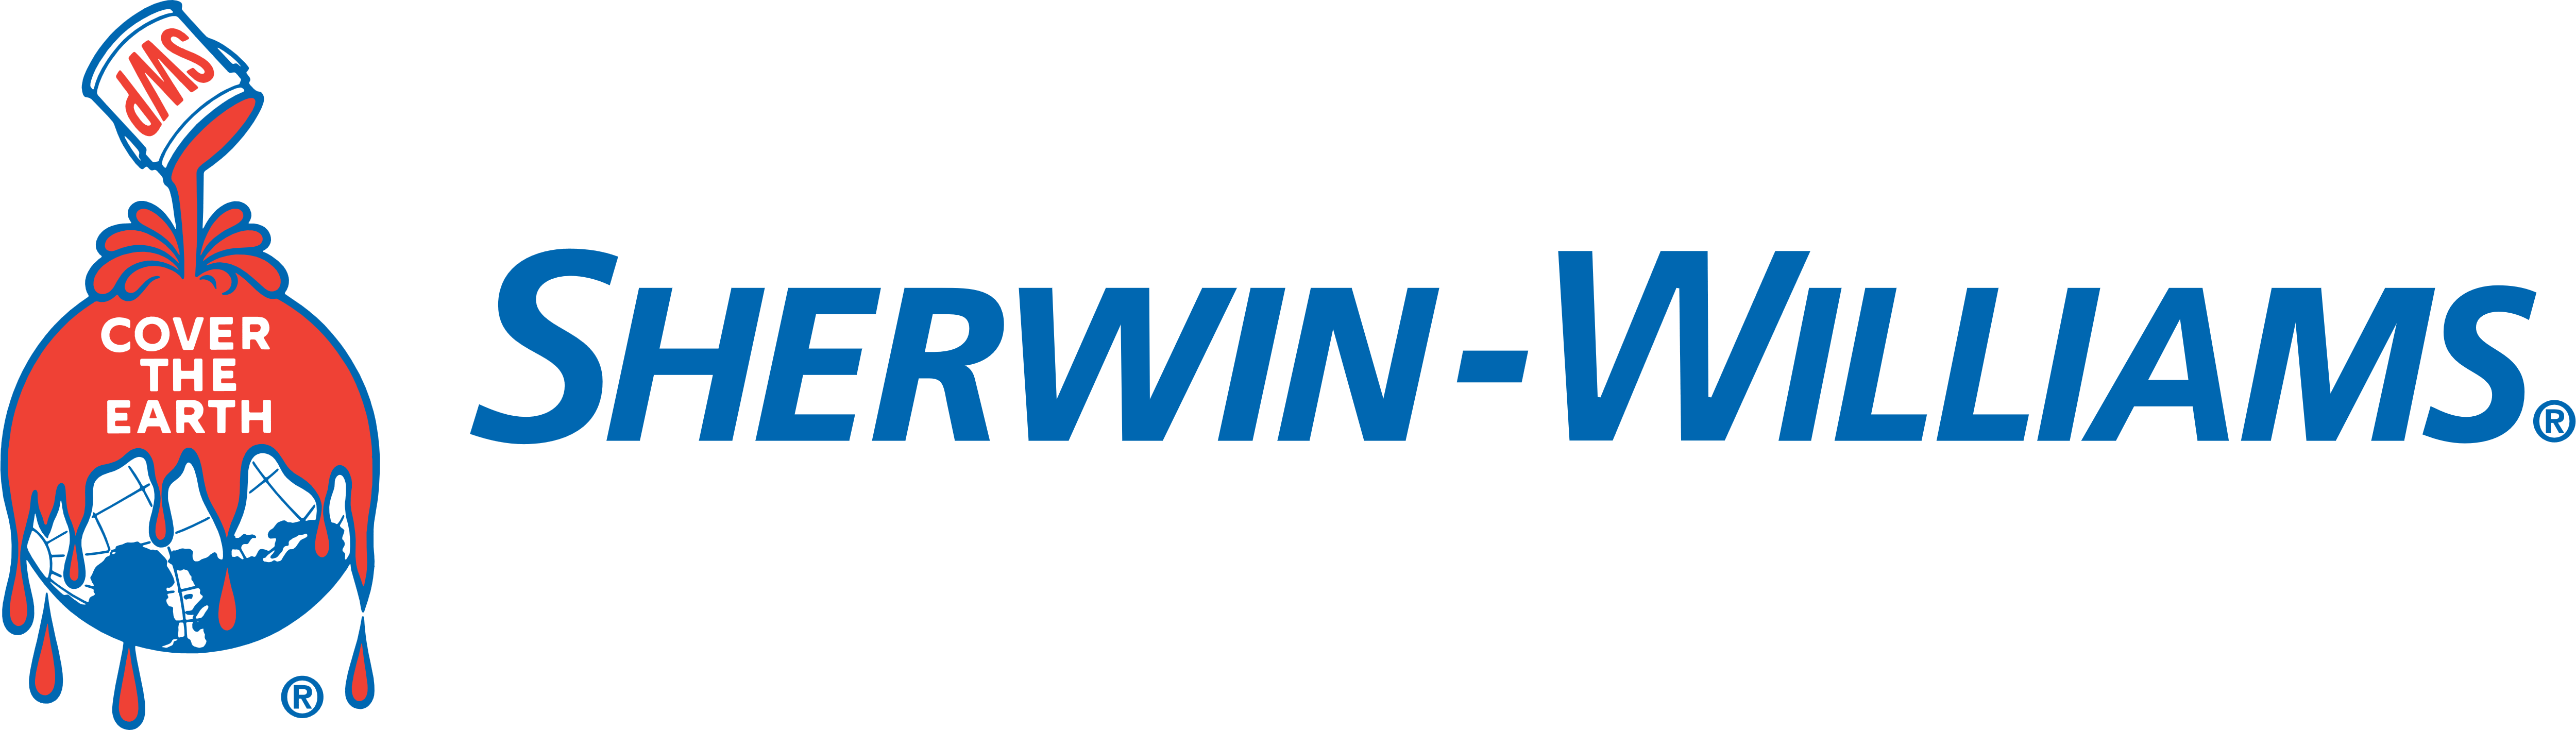 logo for sherwin williams paint